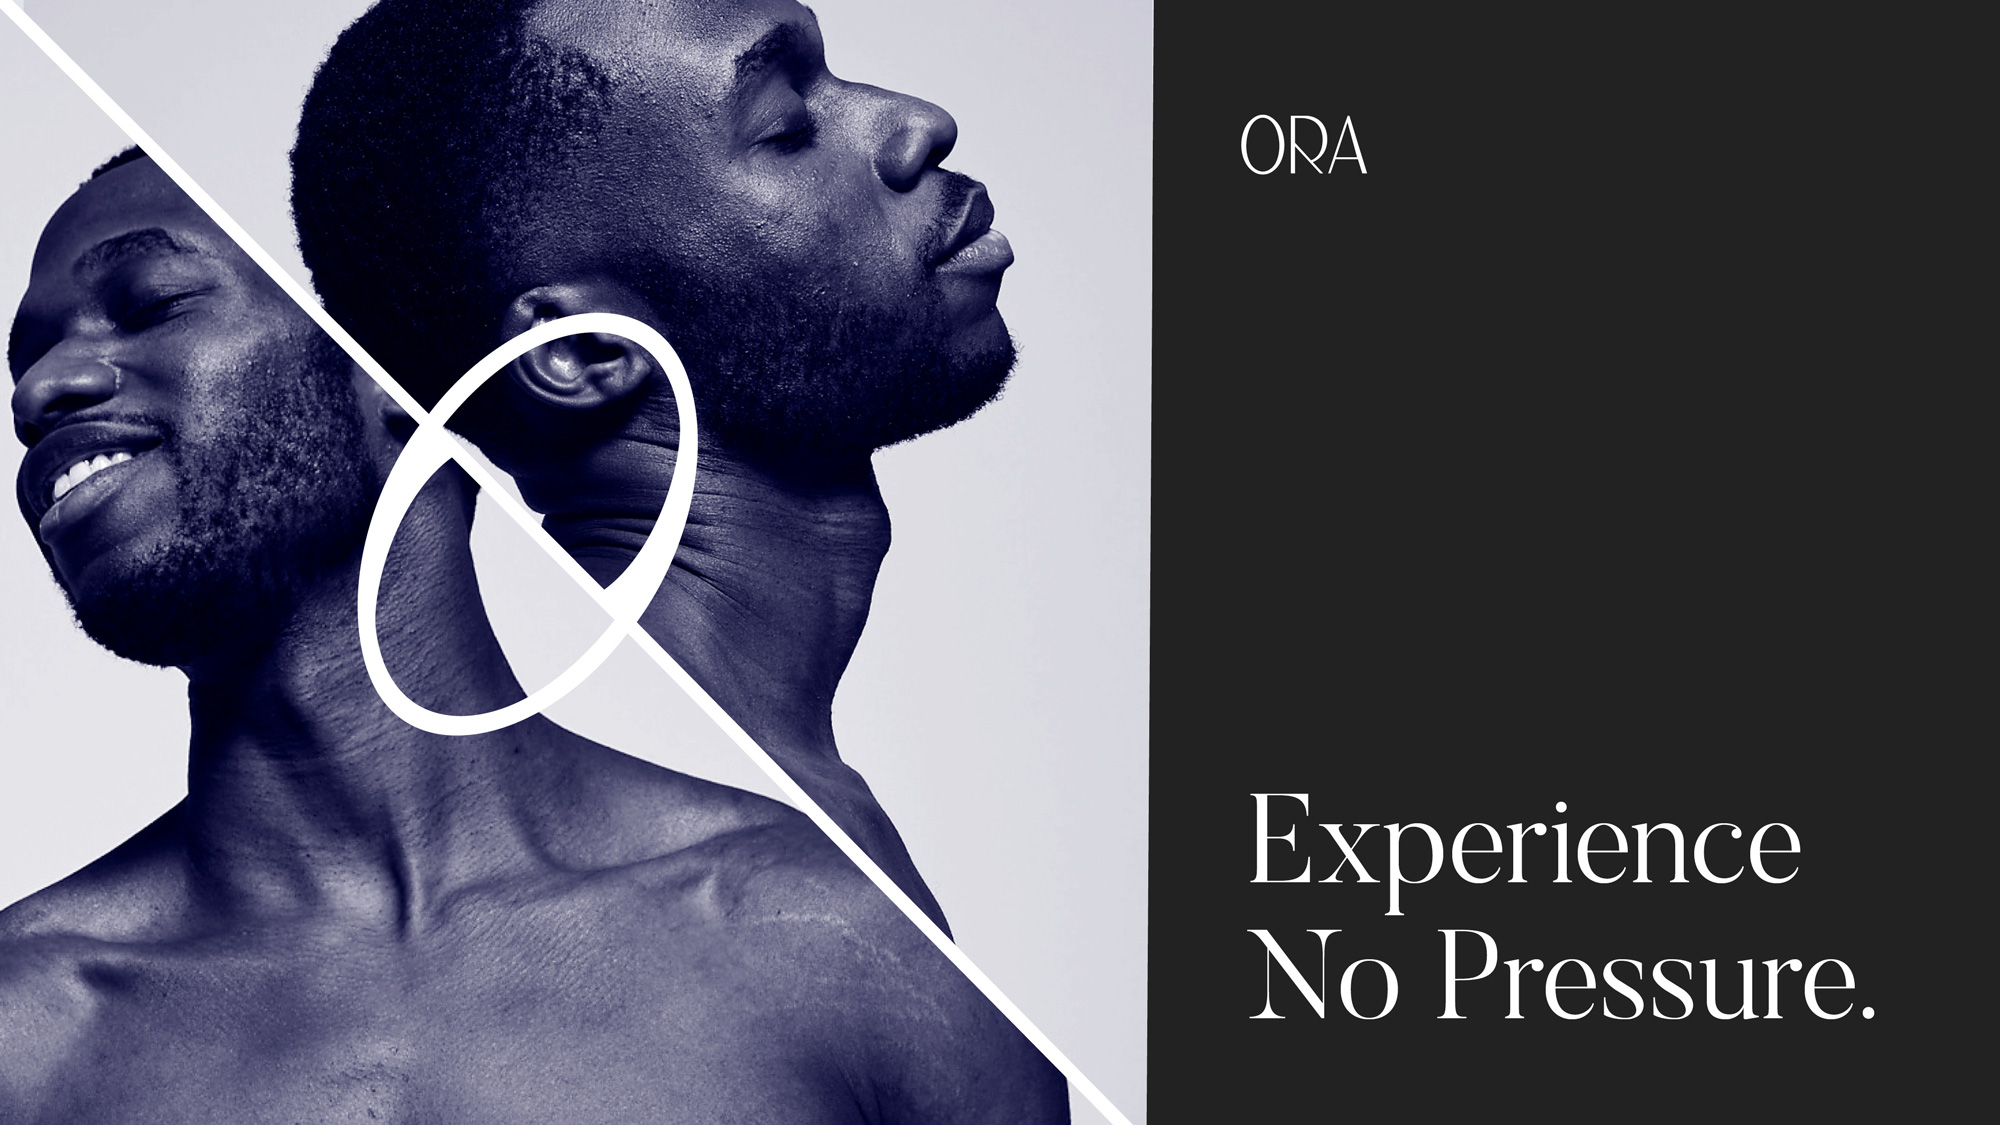 New Logo and Identity for ORA by The Working Assembly